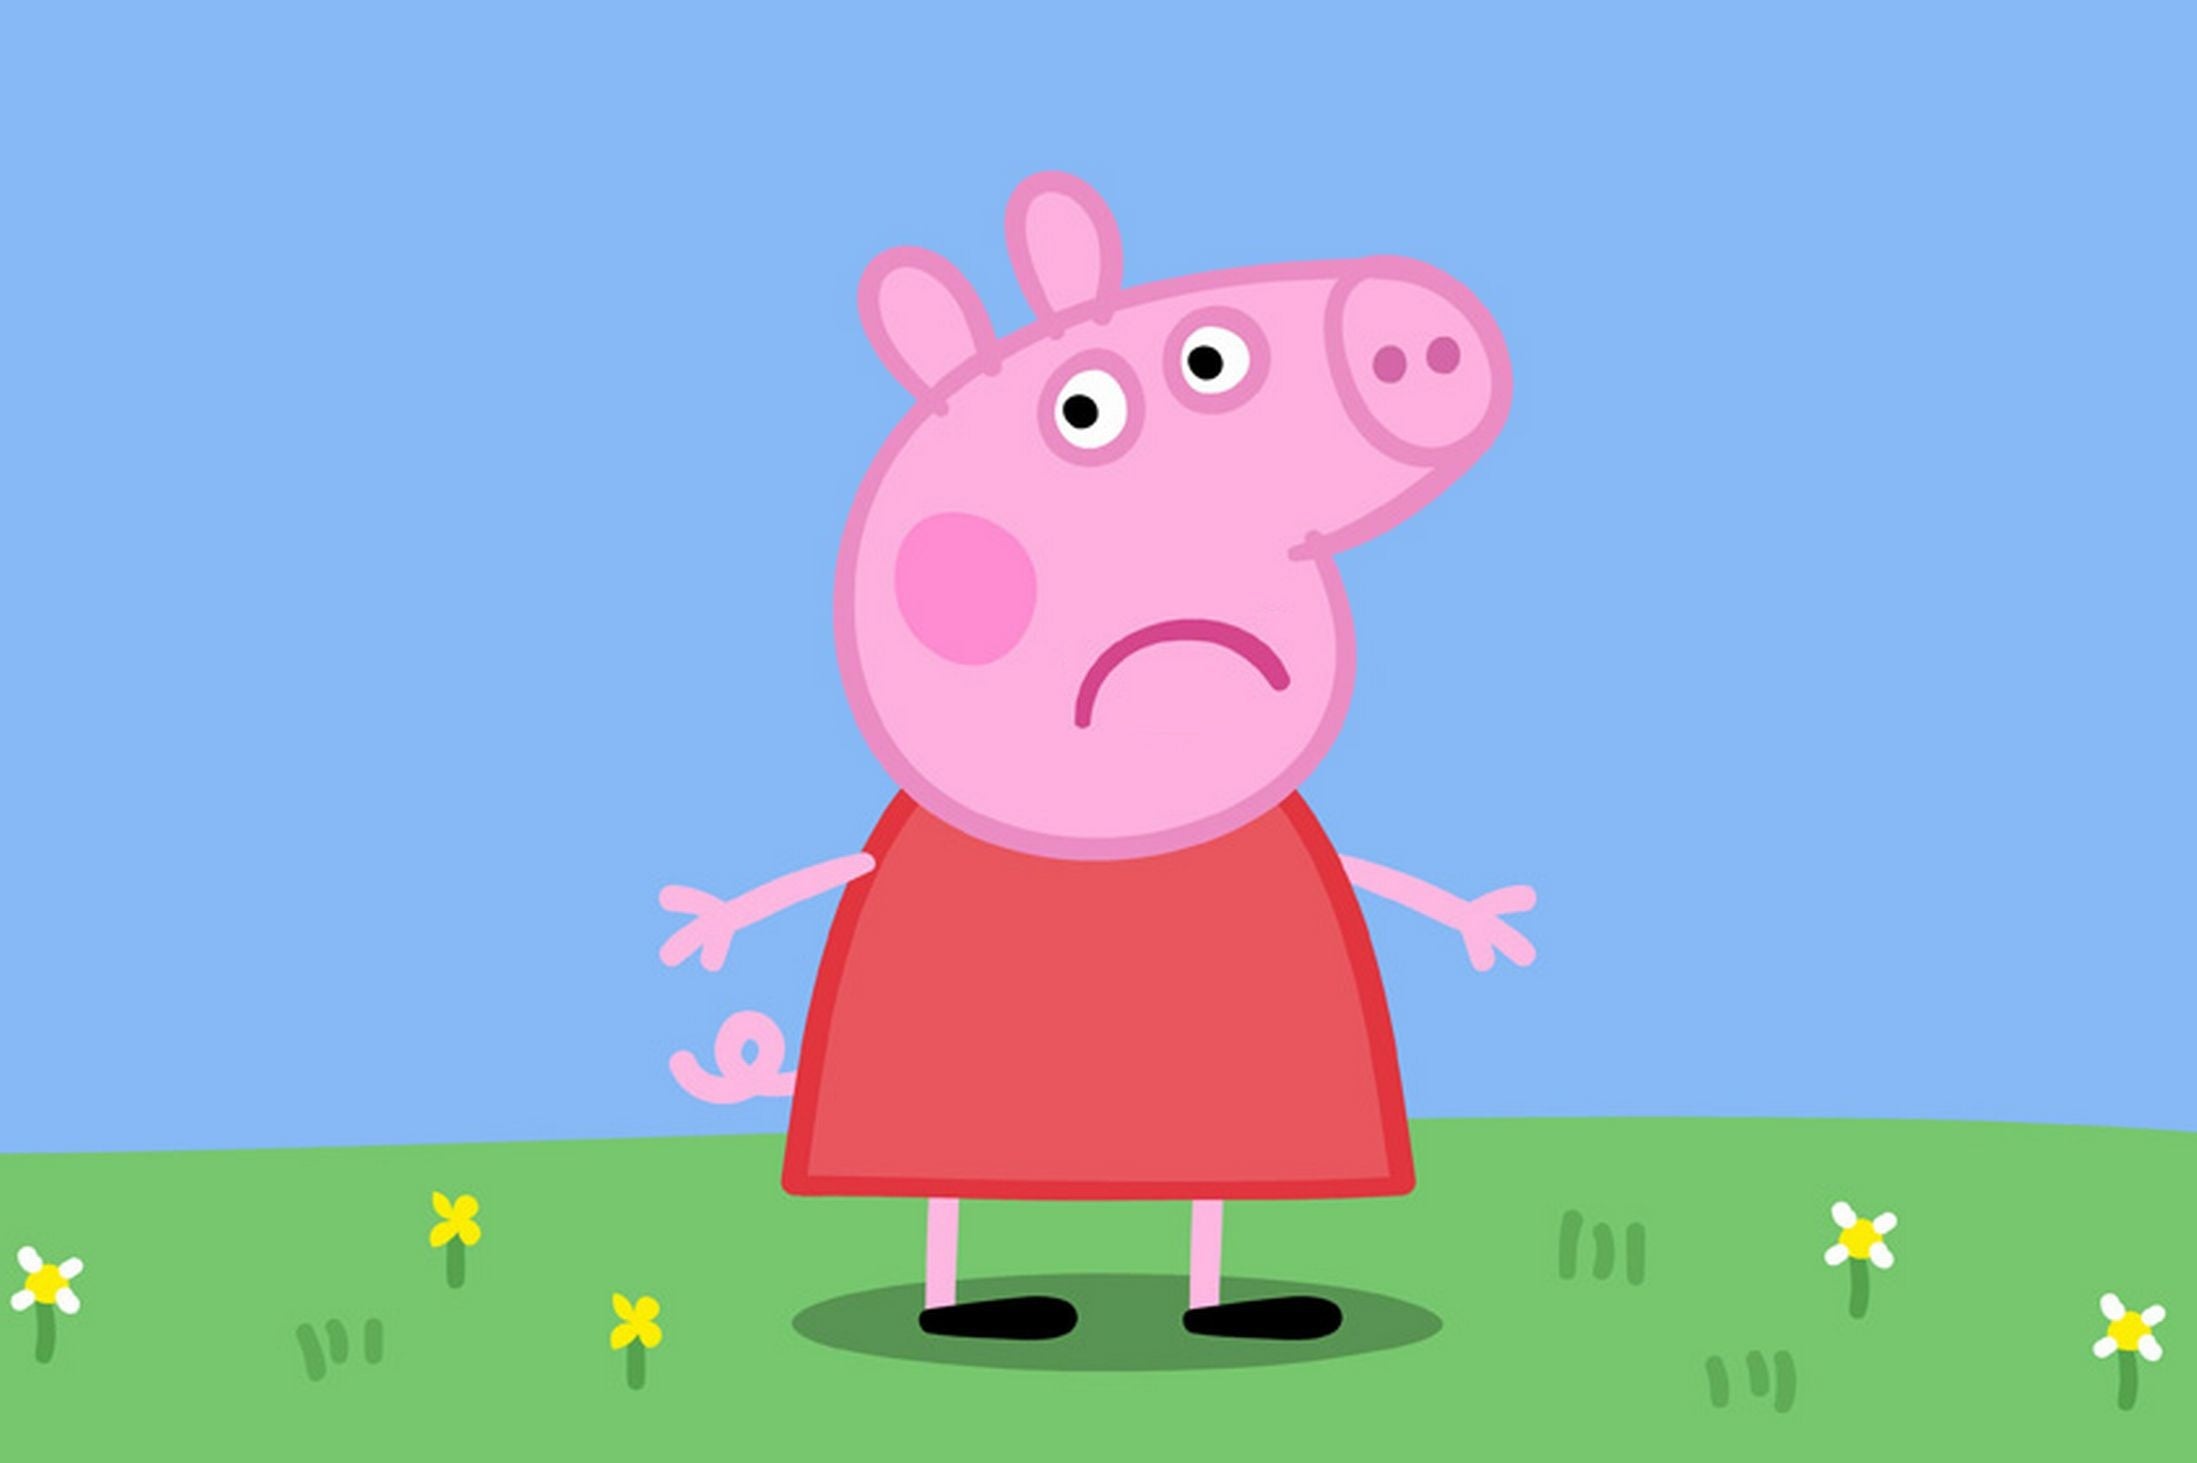 Peppa Pig was on her way to the UK from China